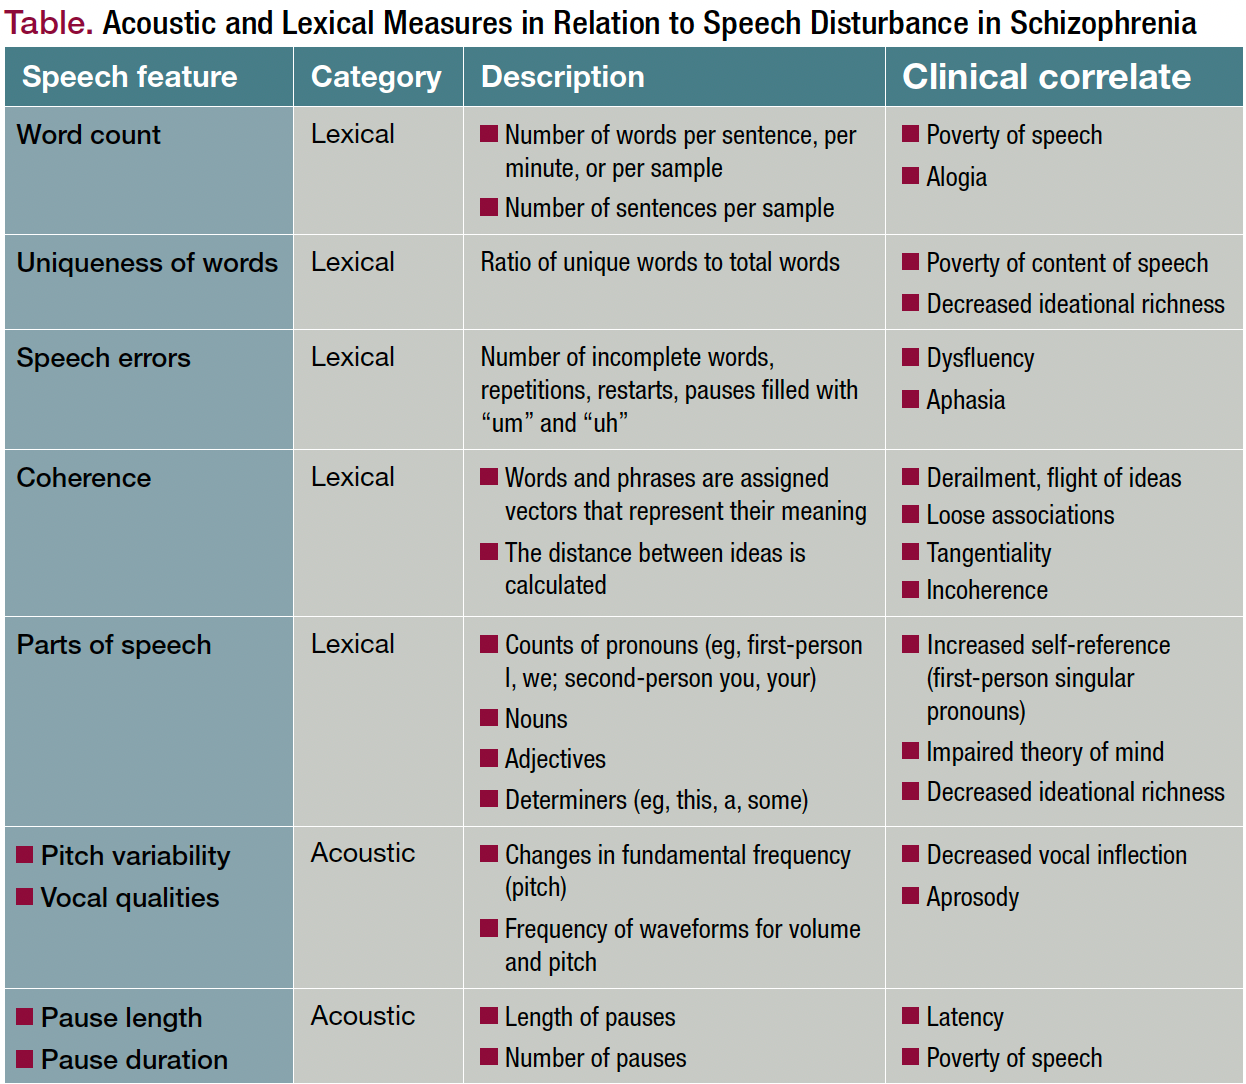 Table. Acoustic and Lexical Measures in Relation to Speech Disturbance in Schizophrenia